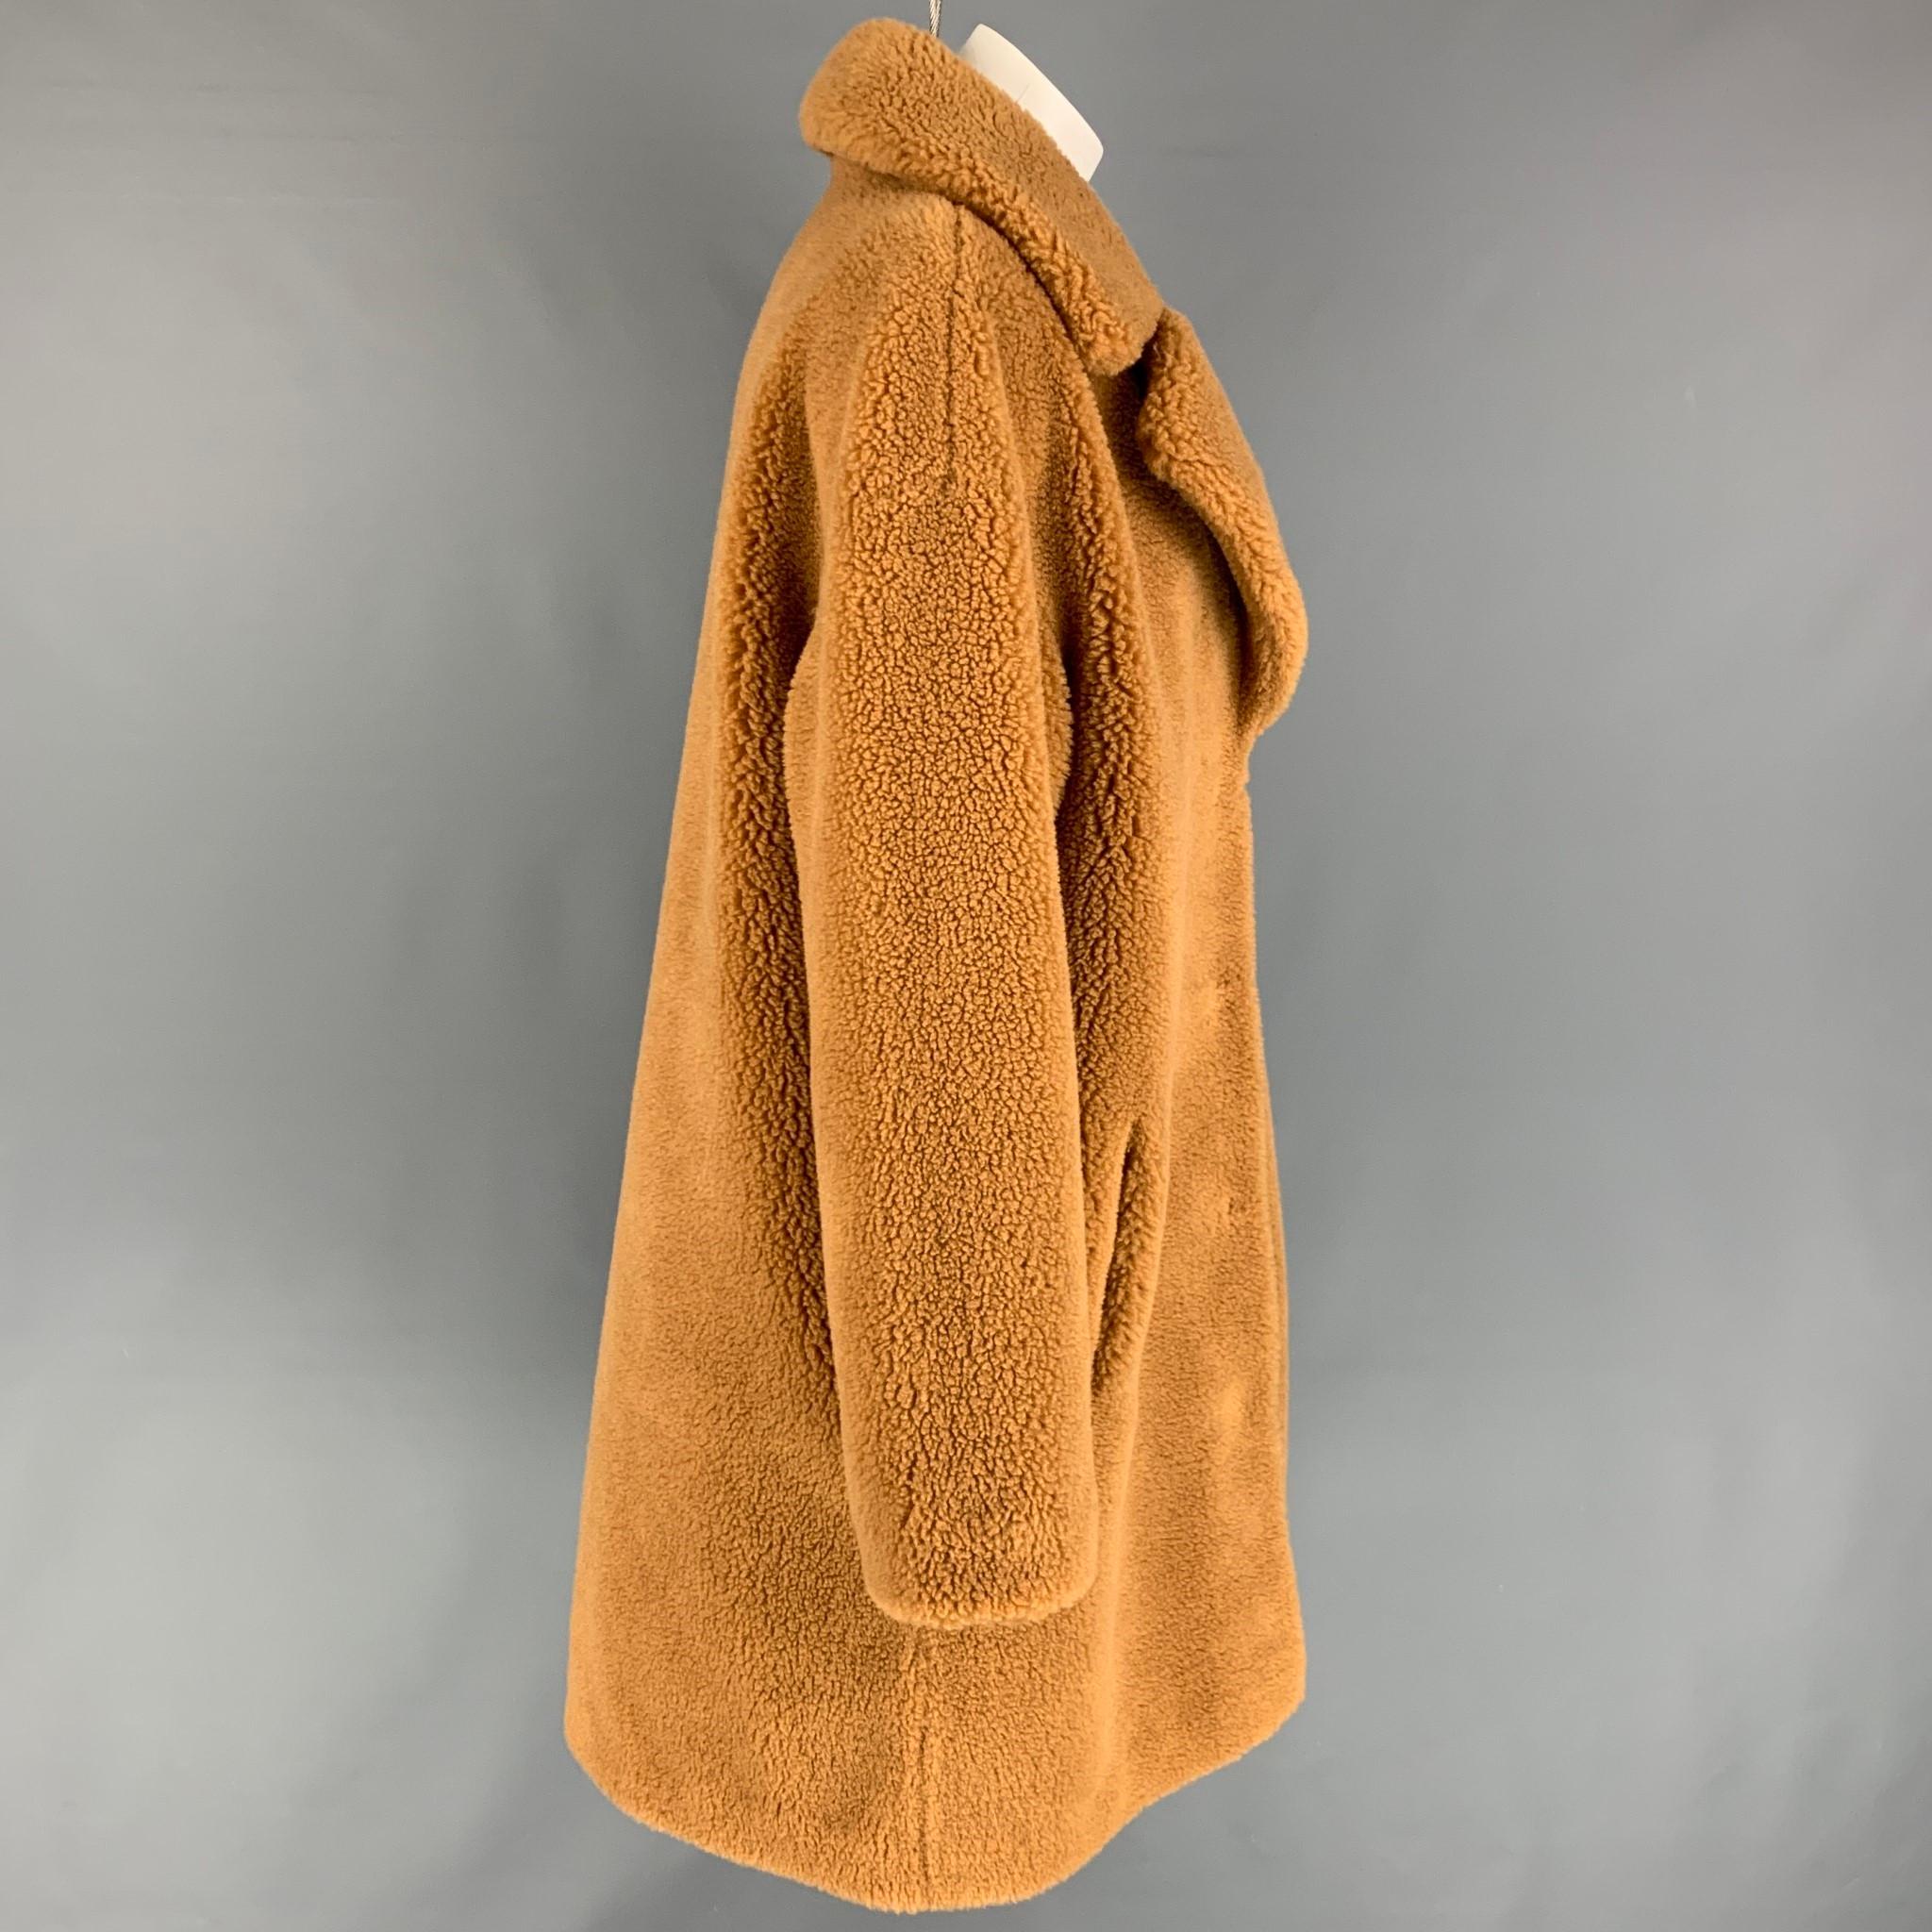 STAND STUDIO coat comes in a tan faux fur featuring a notch lapel, slit pockets, and a hidden snap button closure. 

Very Good Pre-Owned Condition.
Marked: 42

Measurements:

Shoulder: 23 in.
Bust: 46 in.
Sleeve: 24 in.
Length: 39.5 in. 